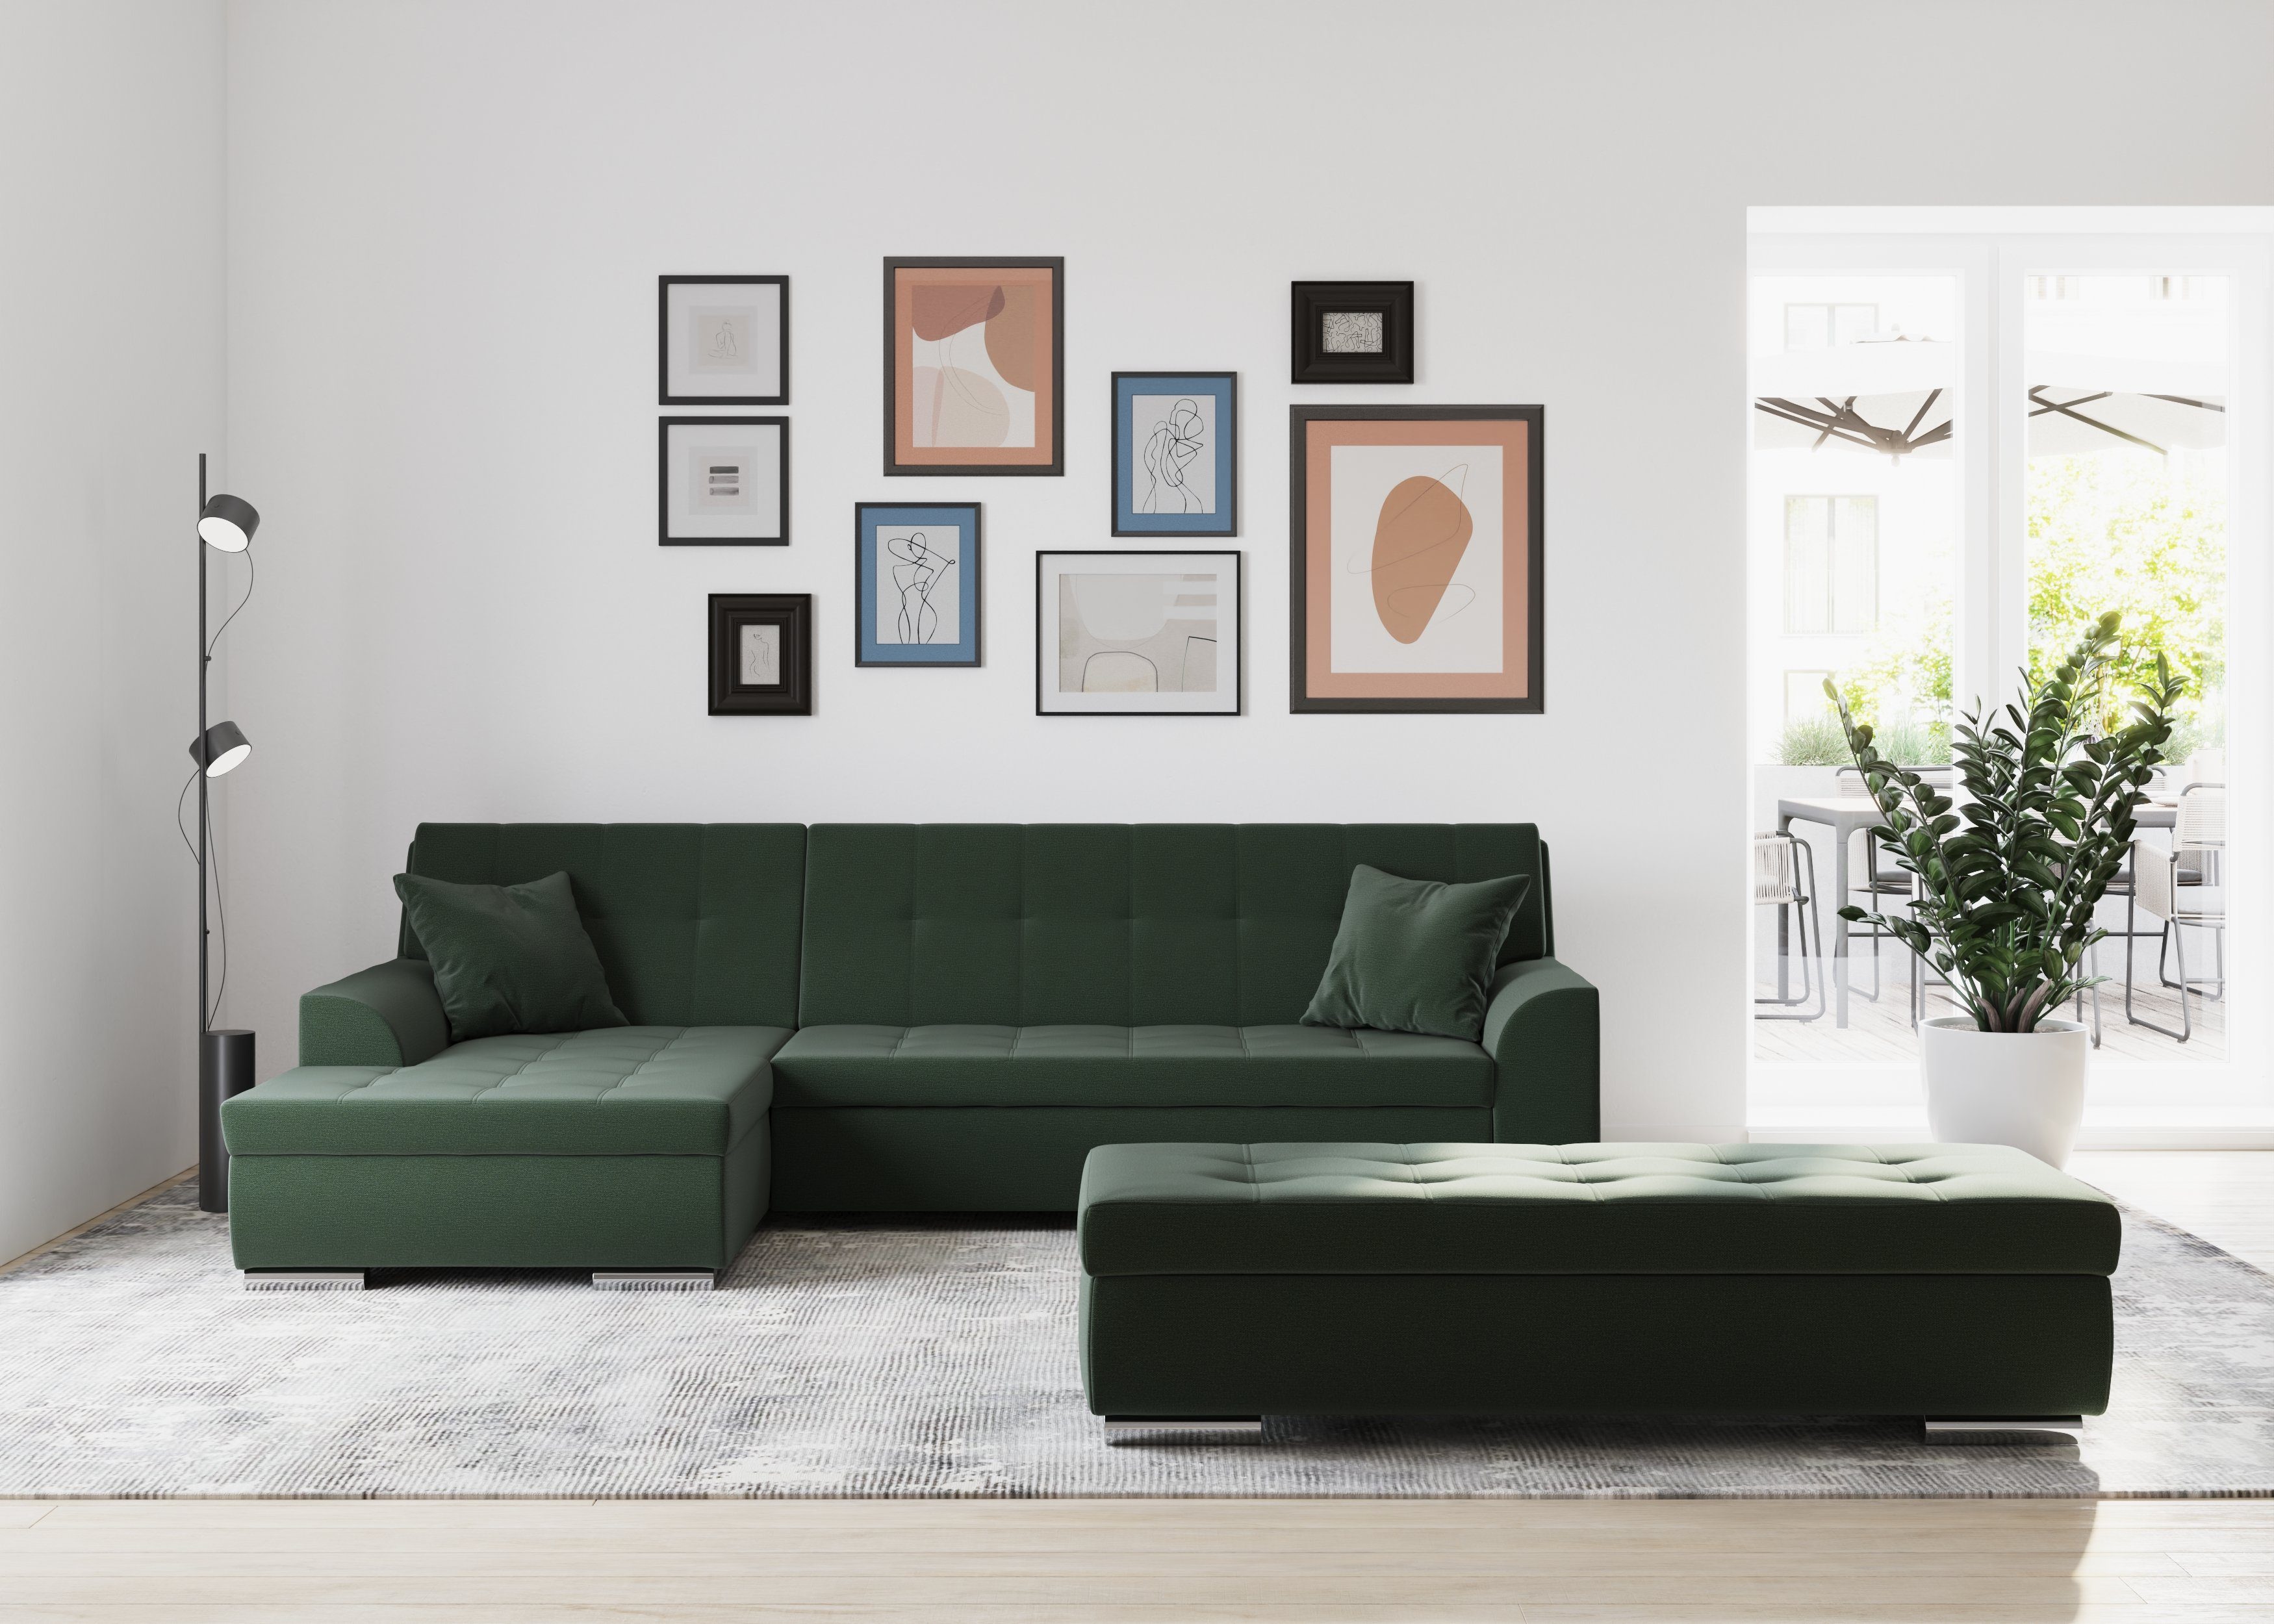 DOMO collection Ecksofa Treviso, wahlweise Bettfunktion, Cord in auch mit